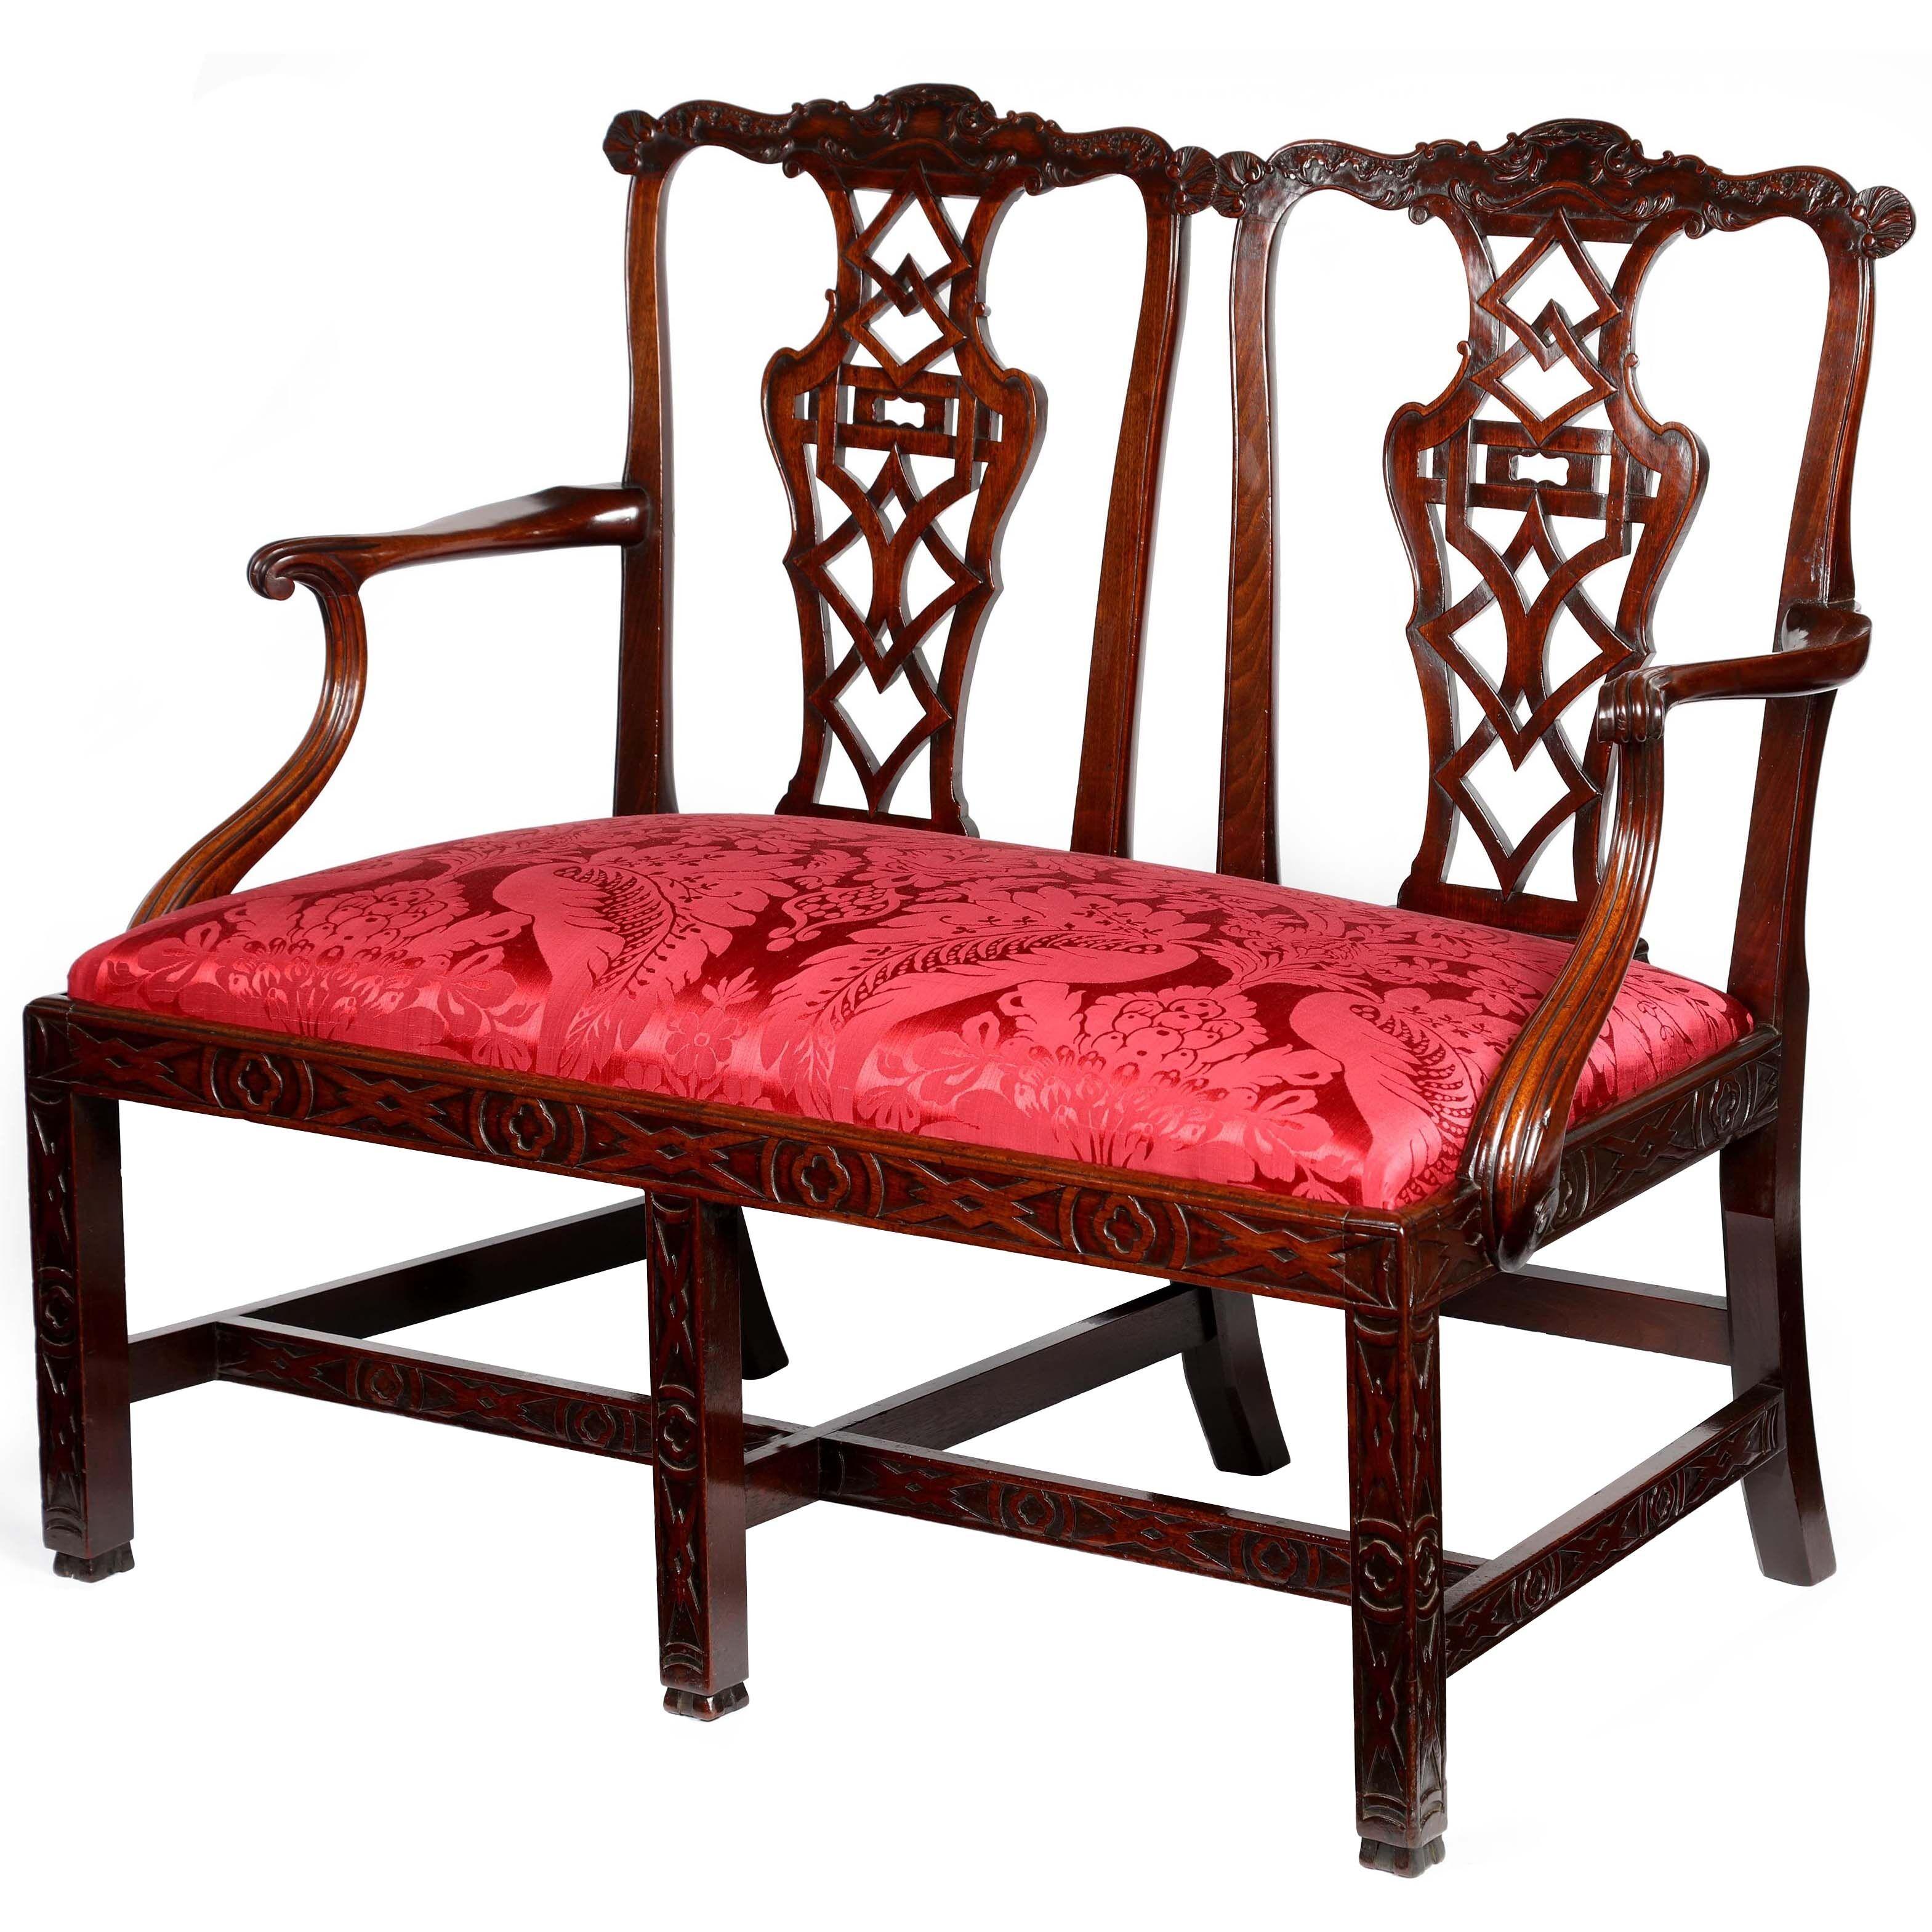 George II Chippendale period carved mahogany chairback settee